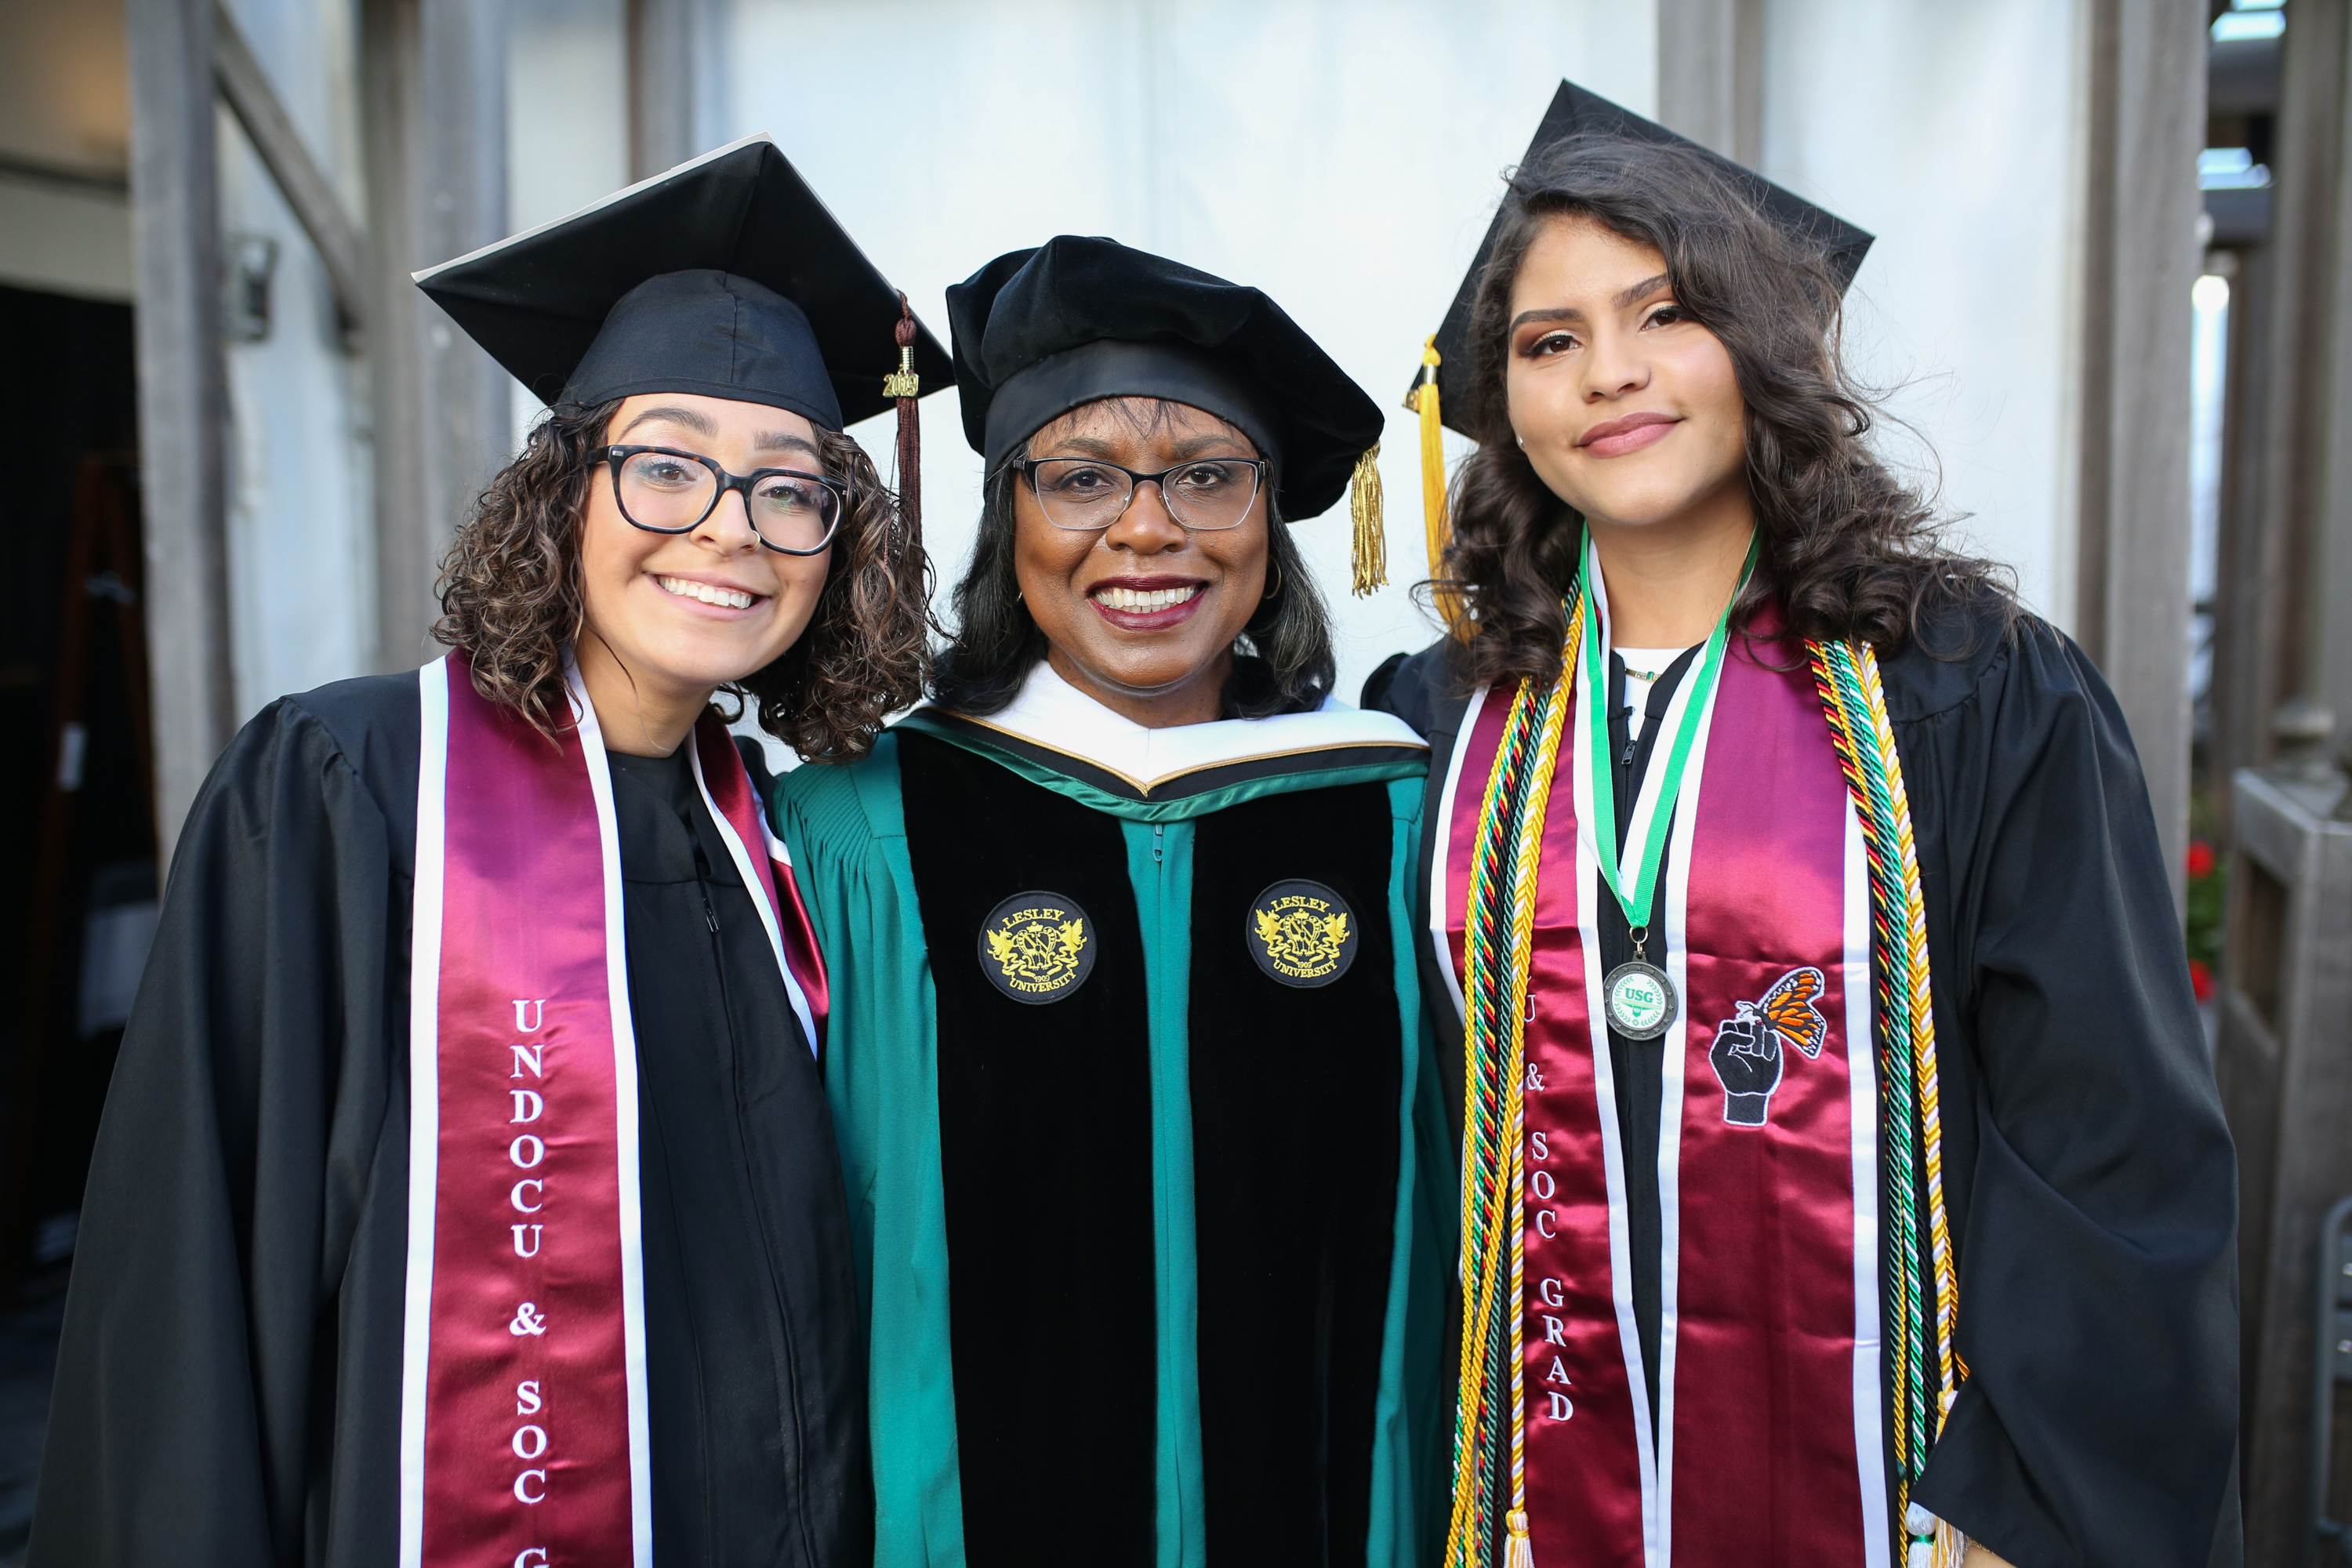 Anita Hill poses with students at Commencement